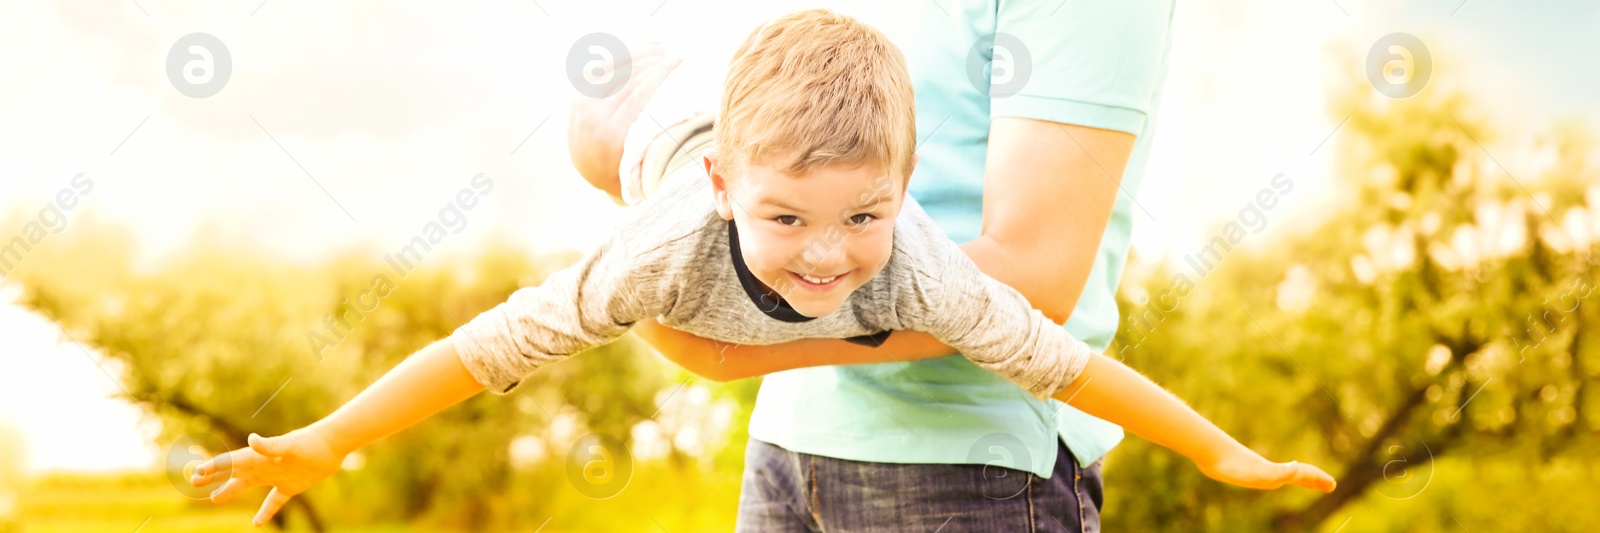 Image of Man playing with his child in park on sunny day. Banner design